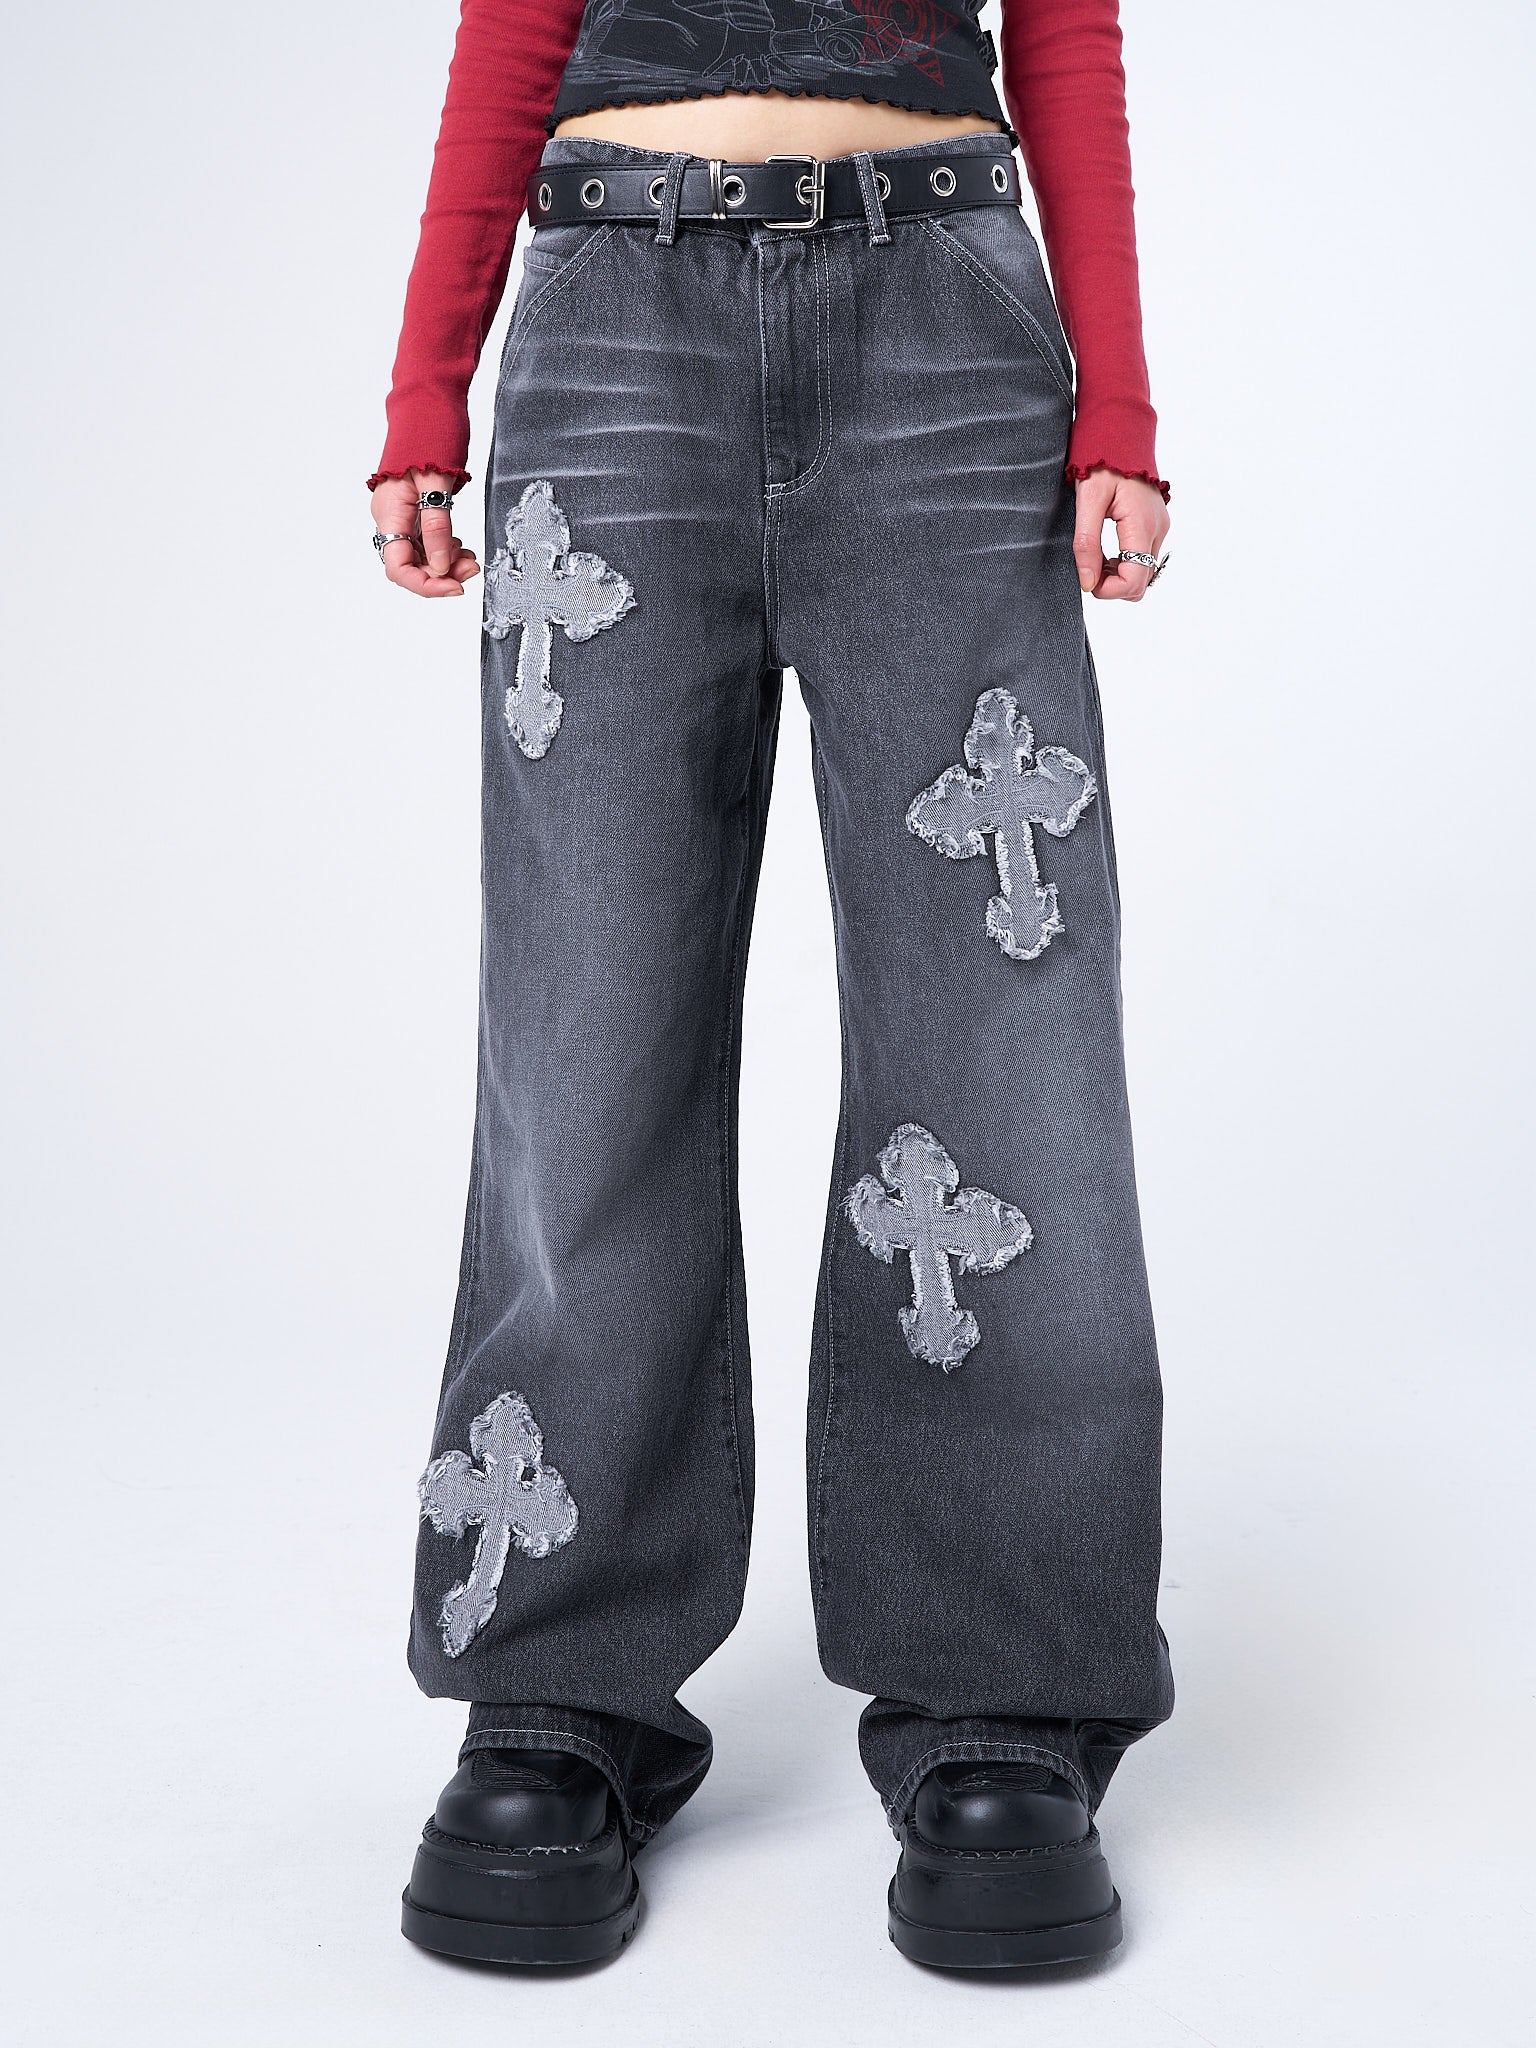 Jeans & Trousers, Shorts and Skirts Clothing for Women | Minga London